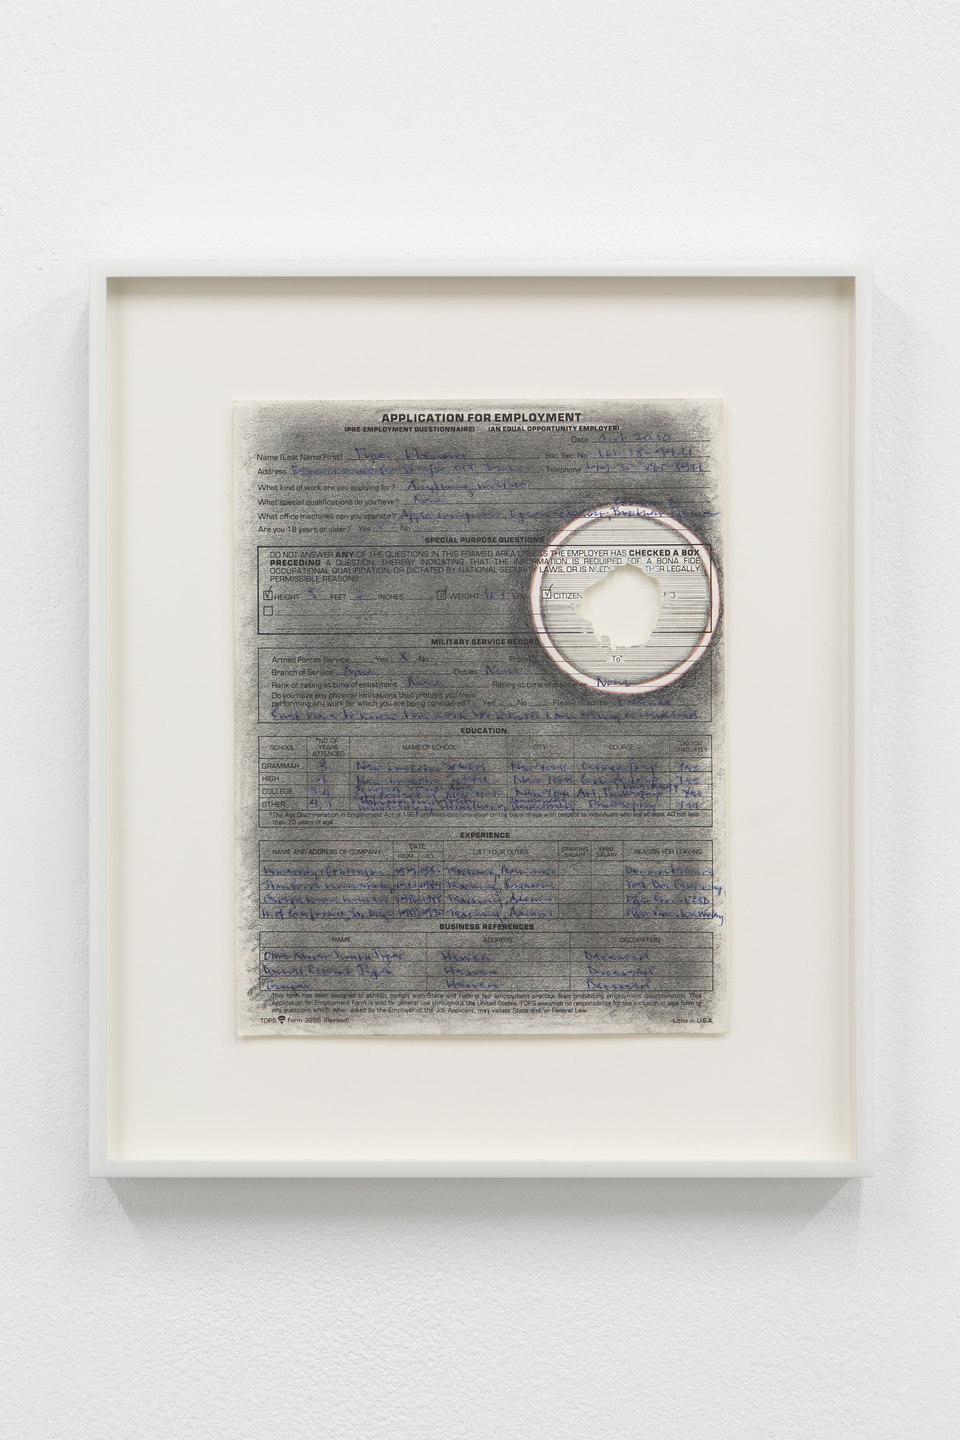 Adrian Piper, 'Vanishing Point #5', 2009, Ball-pen, red ball-point pen, black graphite pencil on application for employment form, sanded with sandpaper, 27.9 x 21.6cm, Civic Duty, 2019, Cell Project Space